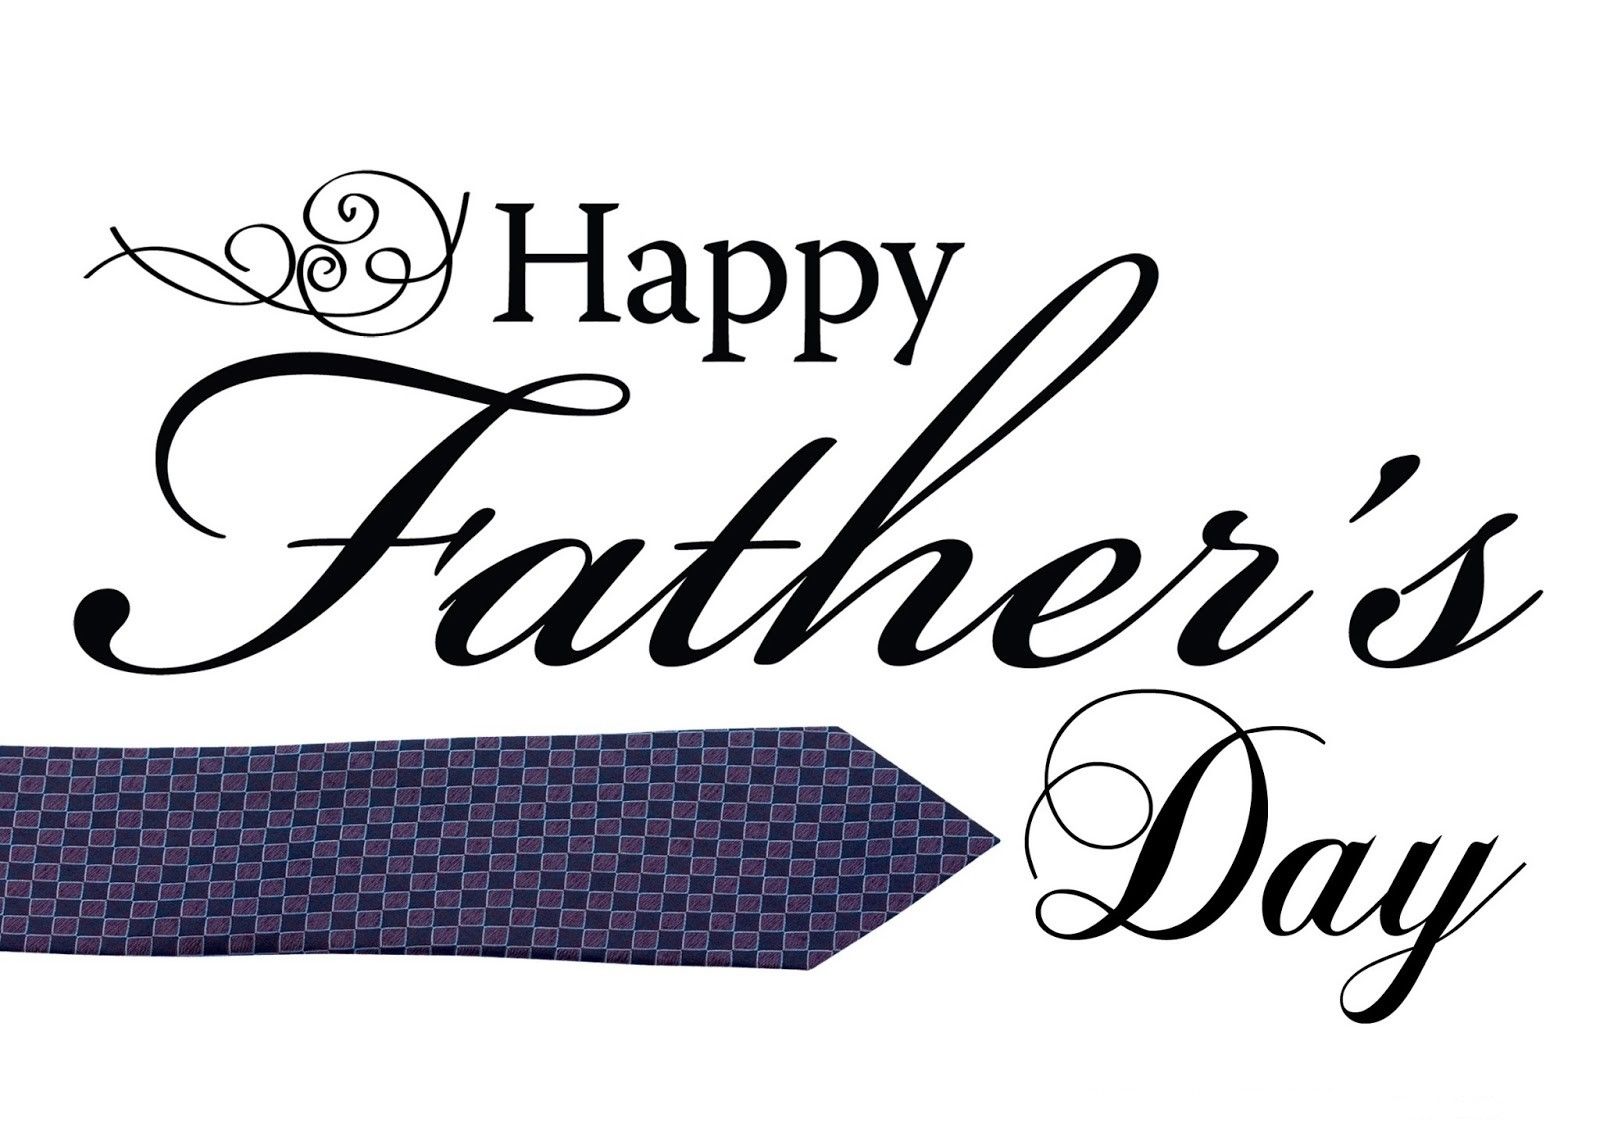 Happy Fathers Day Image 2020 Photo Pics Wallpaper Free